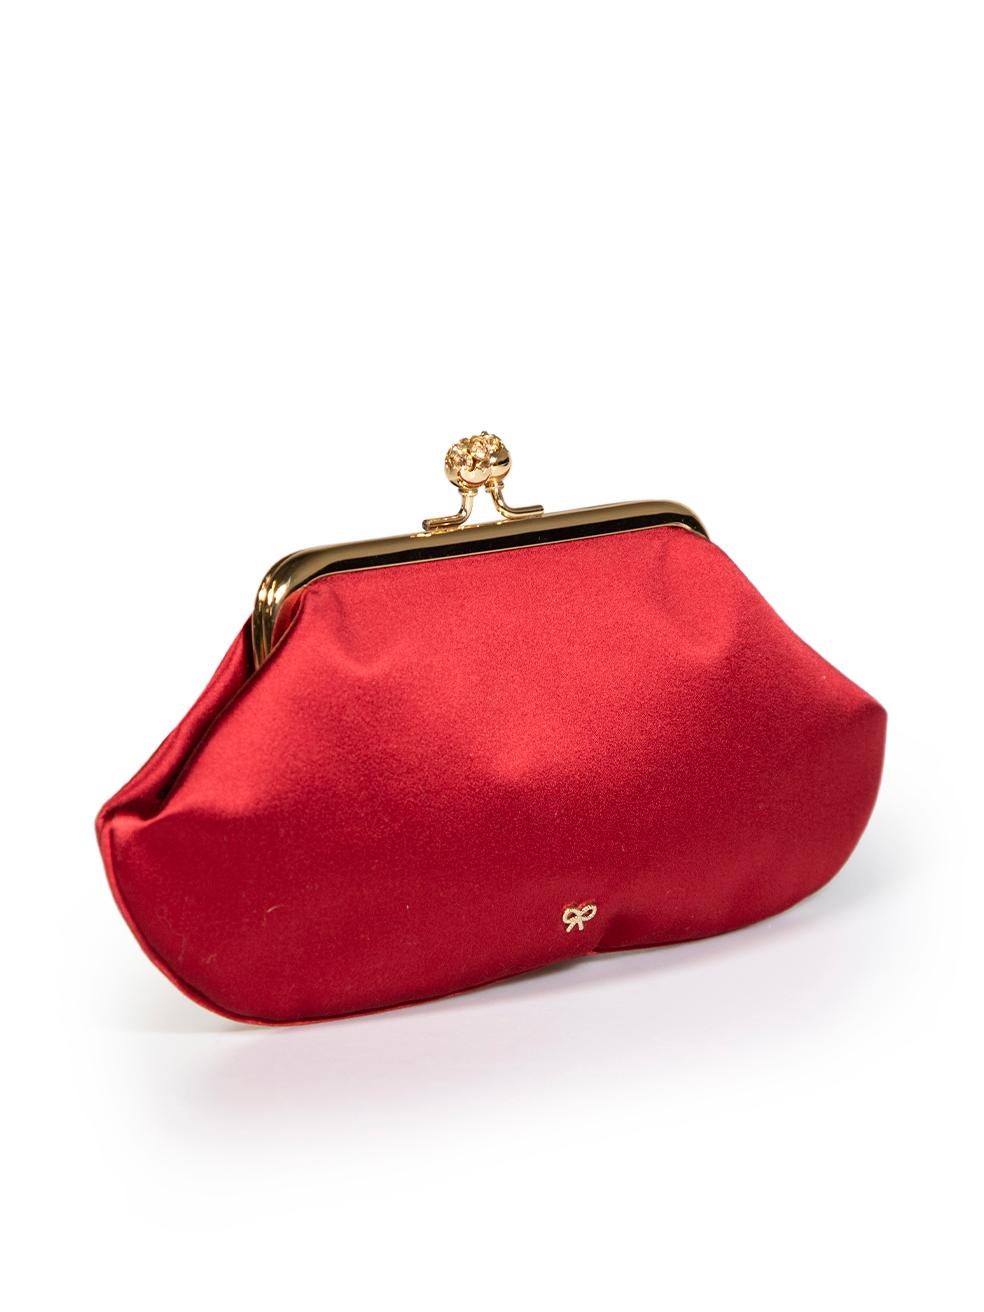 CONDITION is Very good. Hardly any visible wear to pouch is evident on this used Anya Hindmarch designer resale item.
 
 
 
 Details
 
 
 Red
 
 Satin
 
 Mini clutch
 
 Gemstone clasp closure
 
 Gold tone hardware
 
 One main compartment
 
 1x